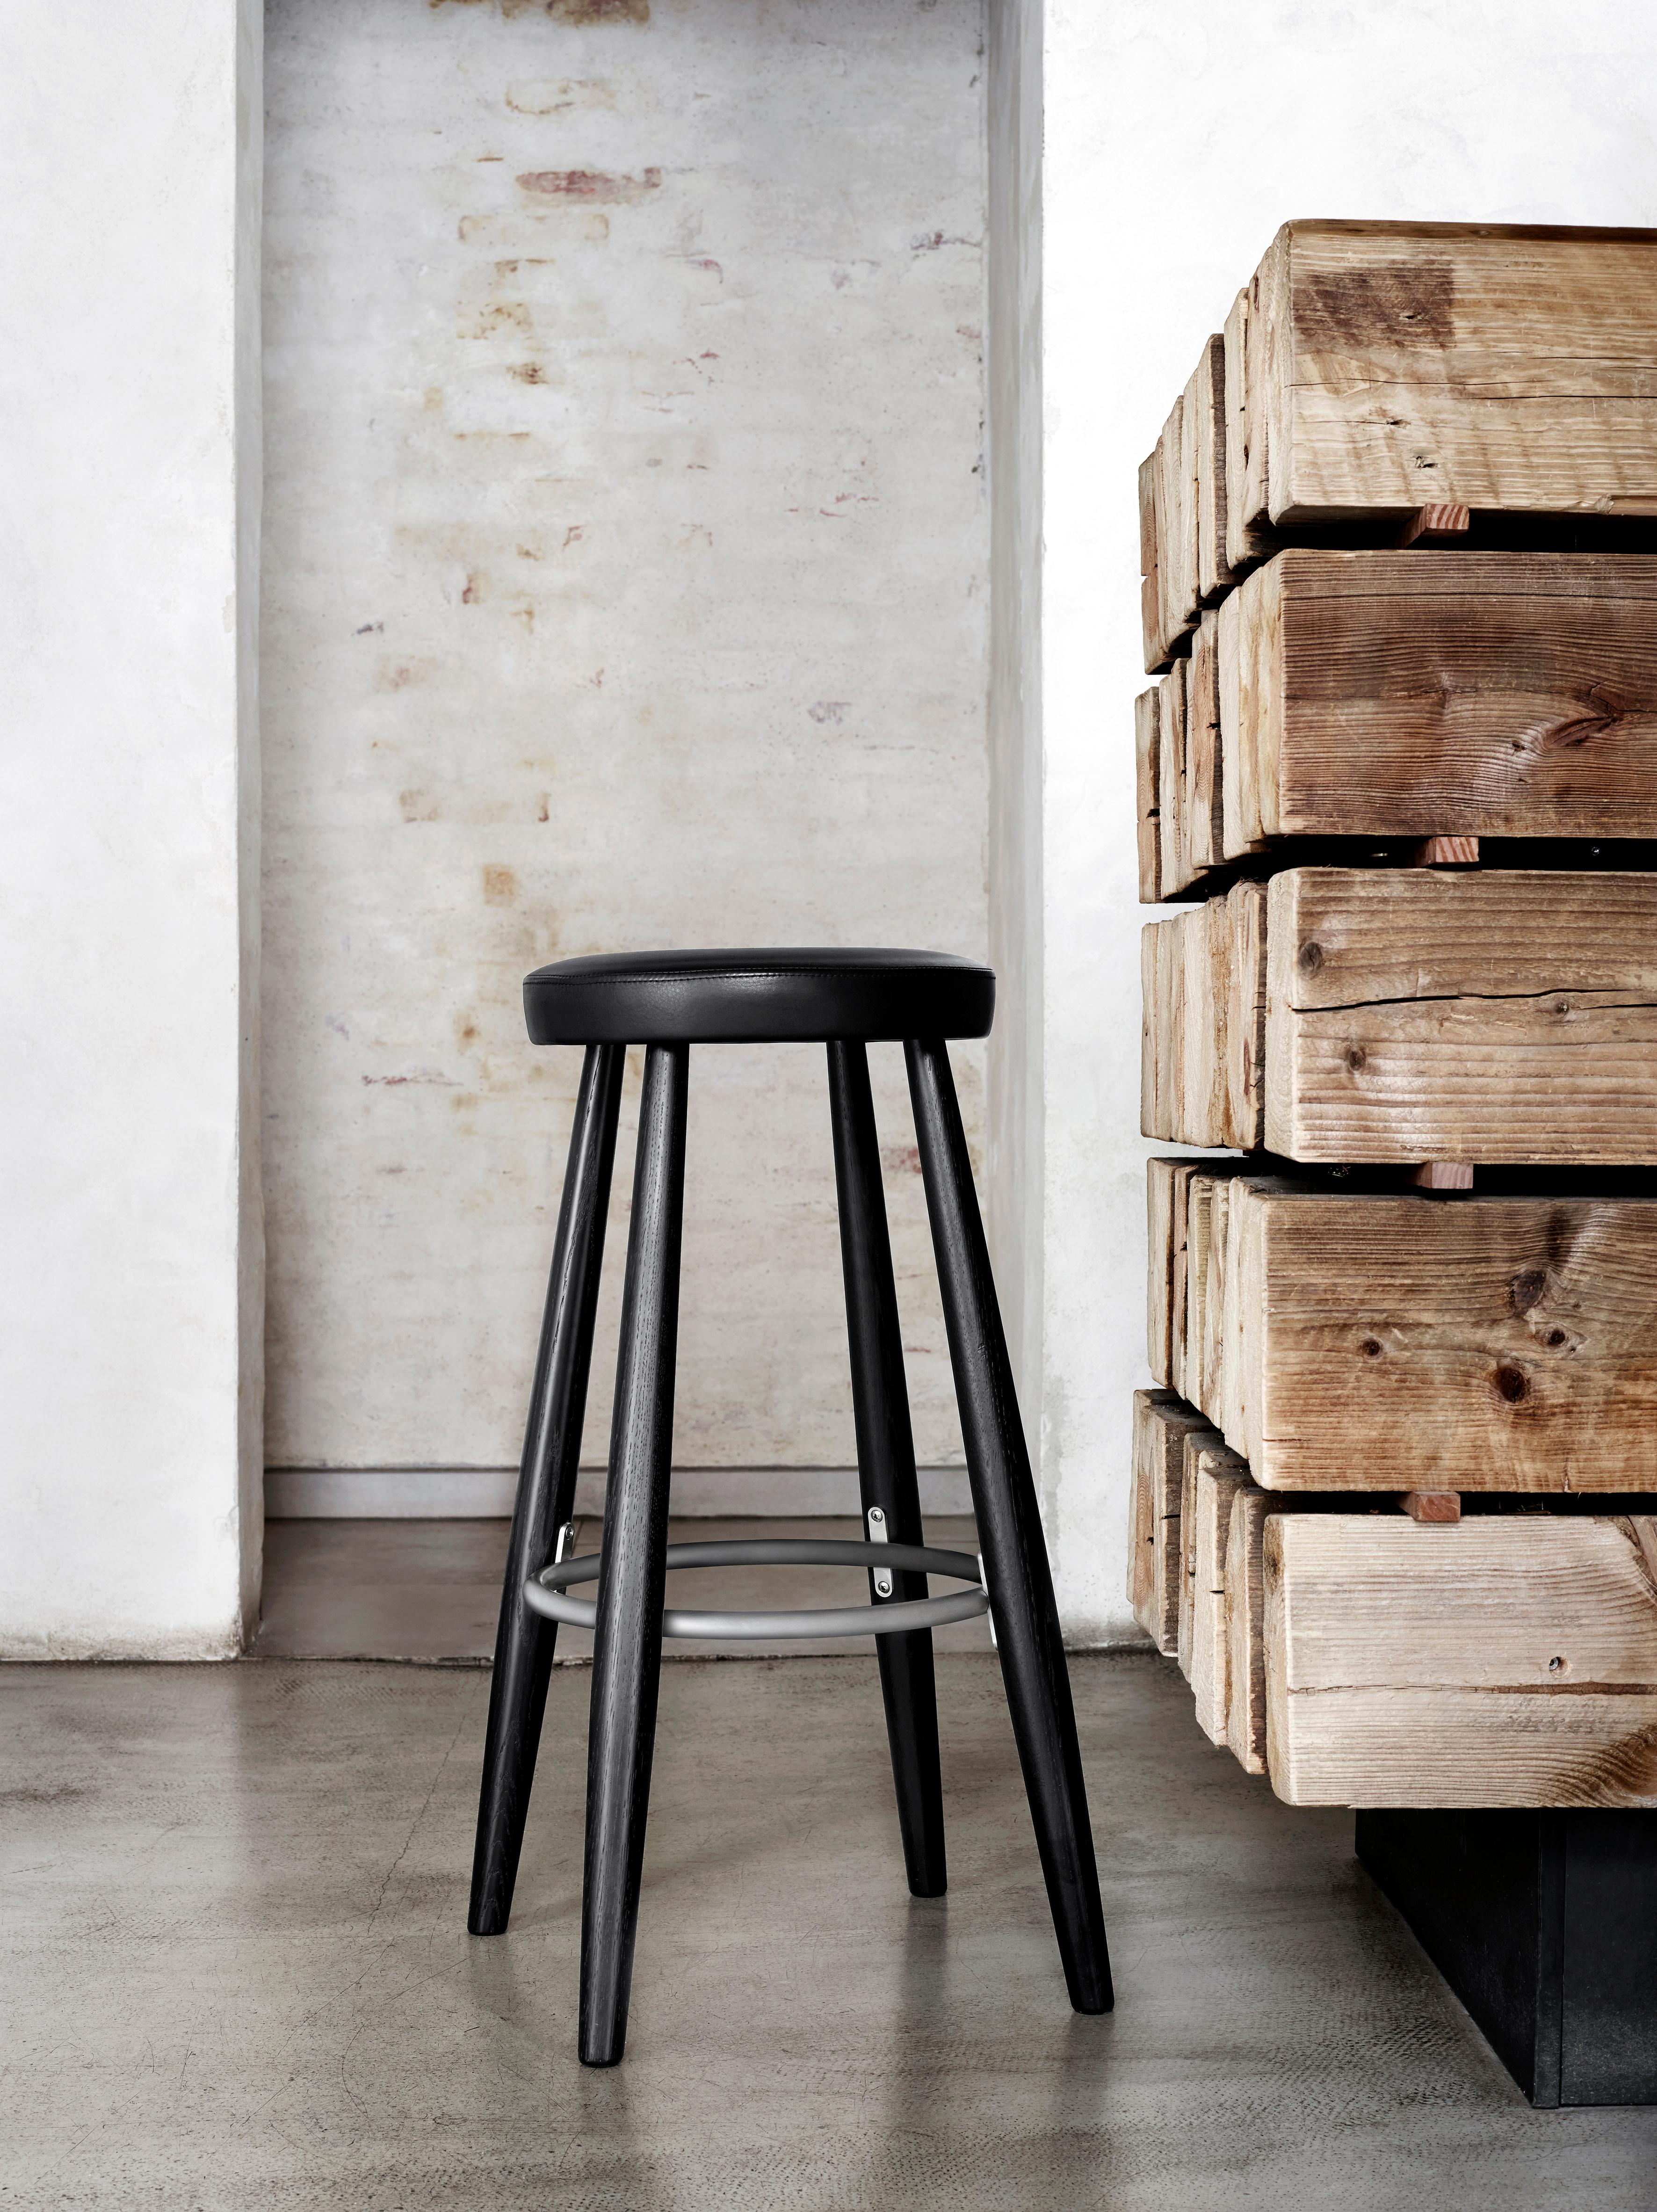 The CH56 barstool in solid wood, leather and stainless steel designed by Hans J. Wegner in 1985 is simple, practical and superbly-crafted for great comfort and an appealing atmosphere in any space.

Dimensions: 15.4in D x 15.4in W x 29.9in H
The